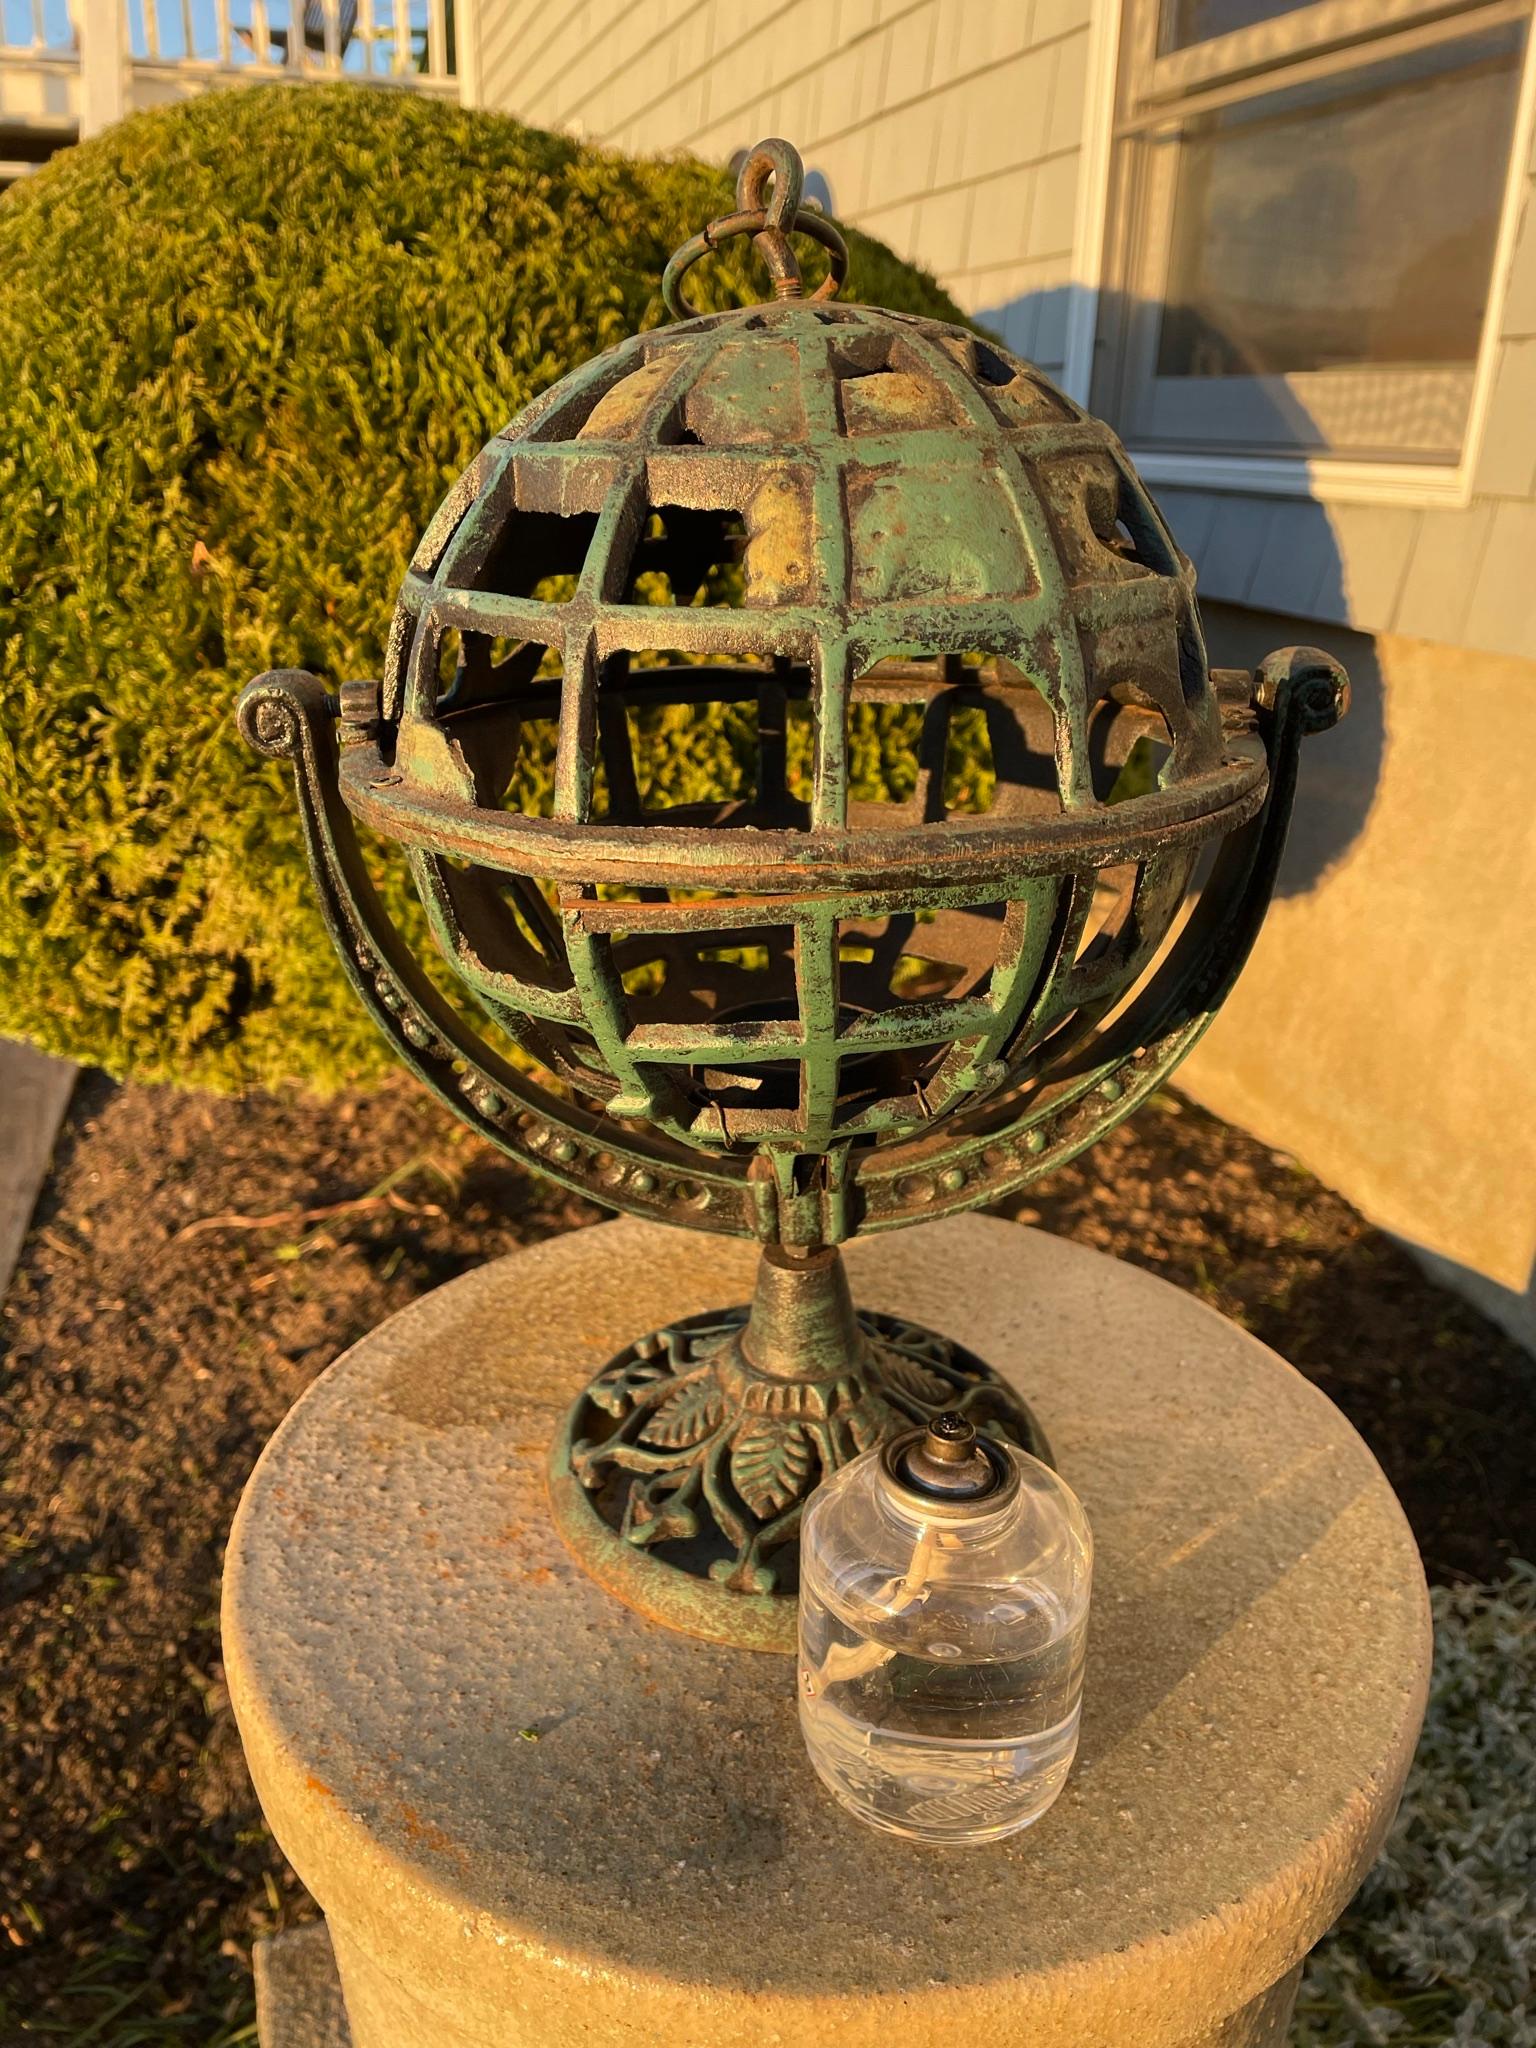 Japanese Old Unique Five Continents Globe Lighting Lantern 9